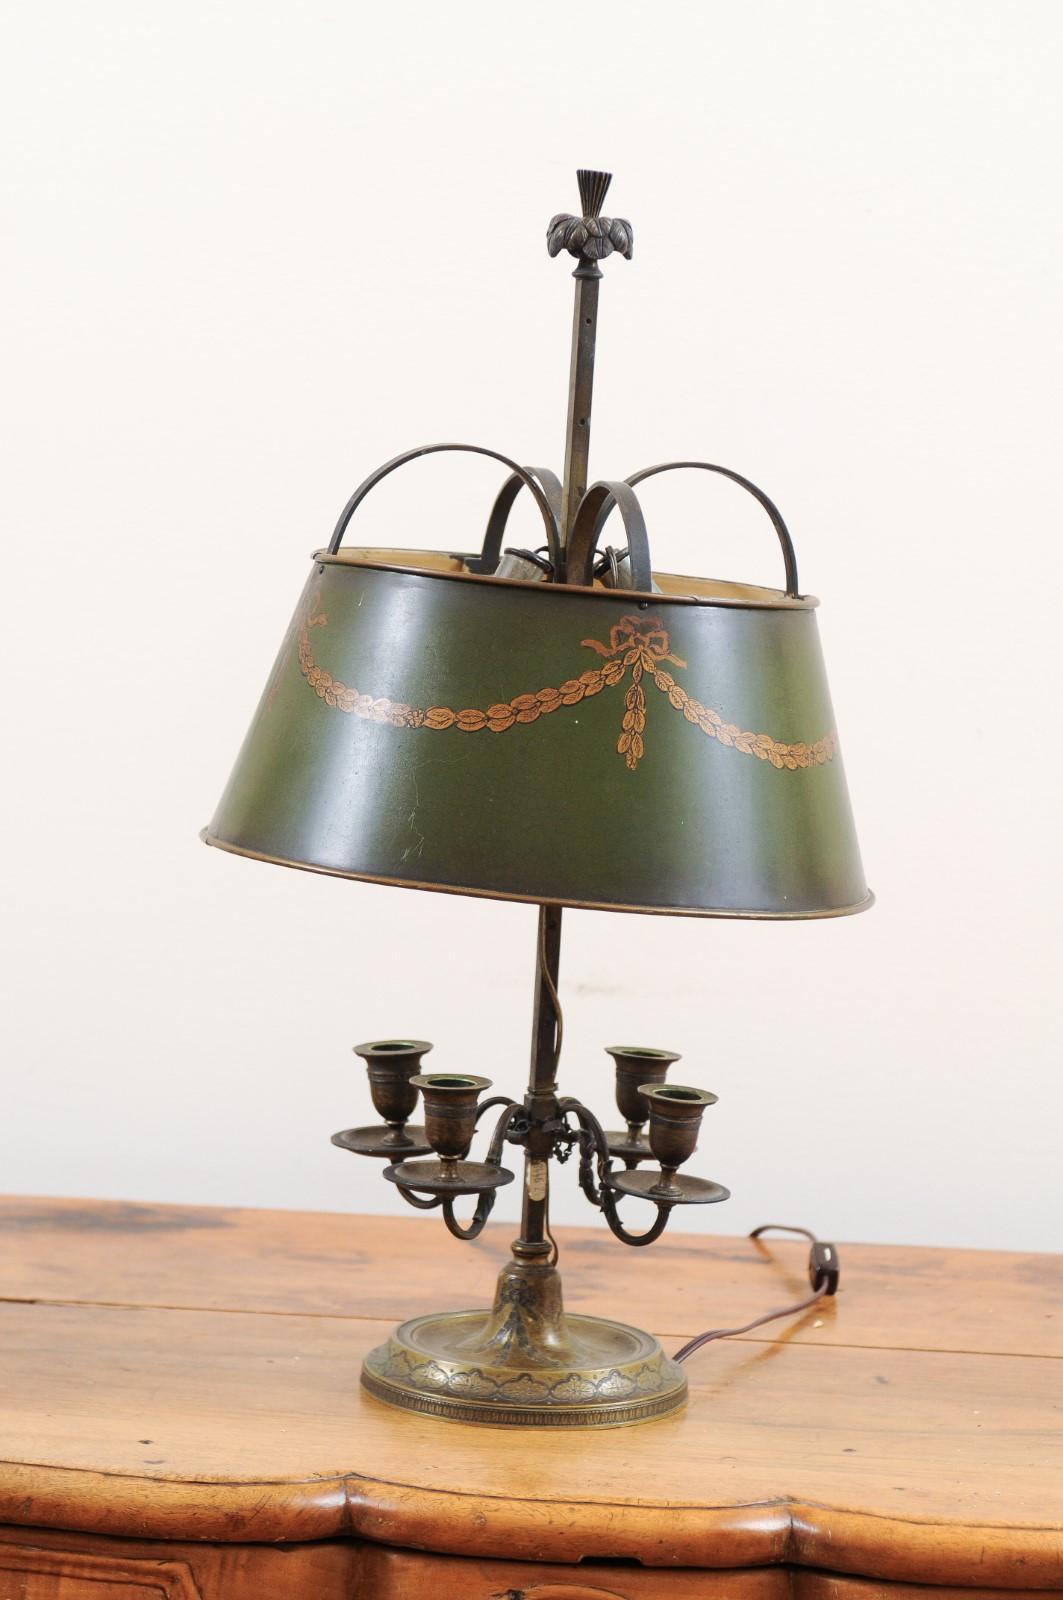 A French Napoléon III period green painted tôle table lamp from the mid-19th century, with two lights, bobèches and garlands. Created in France at the beginning of emperor Napoléon III's reign, this table lamp features a green painted tôle shade